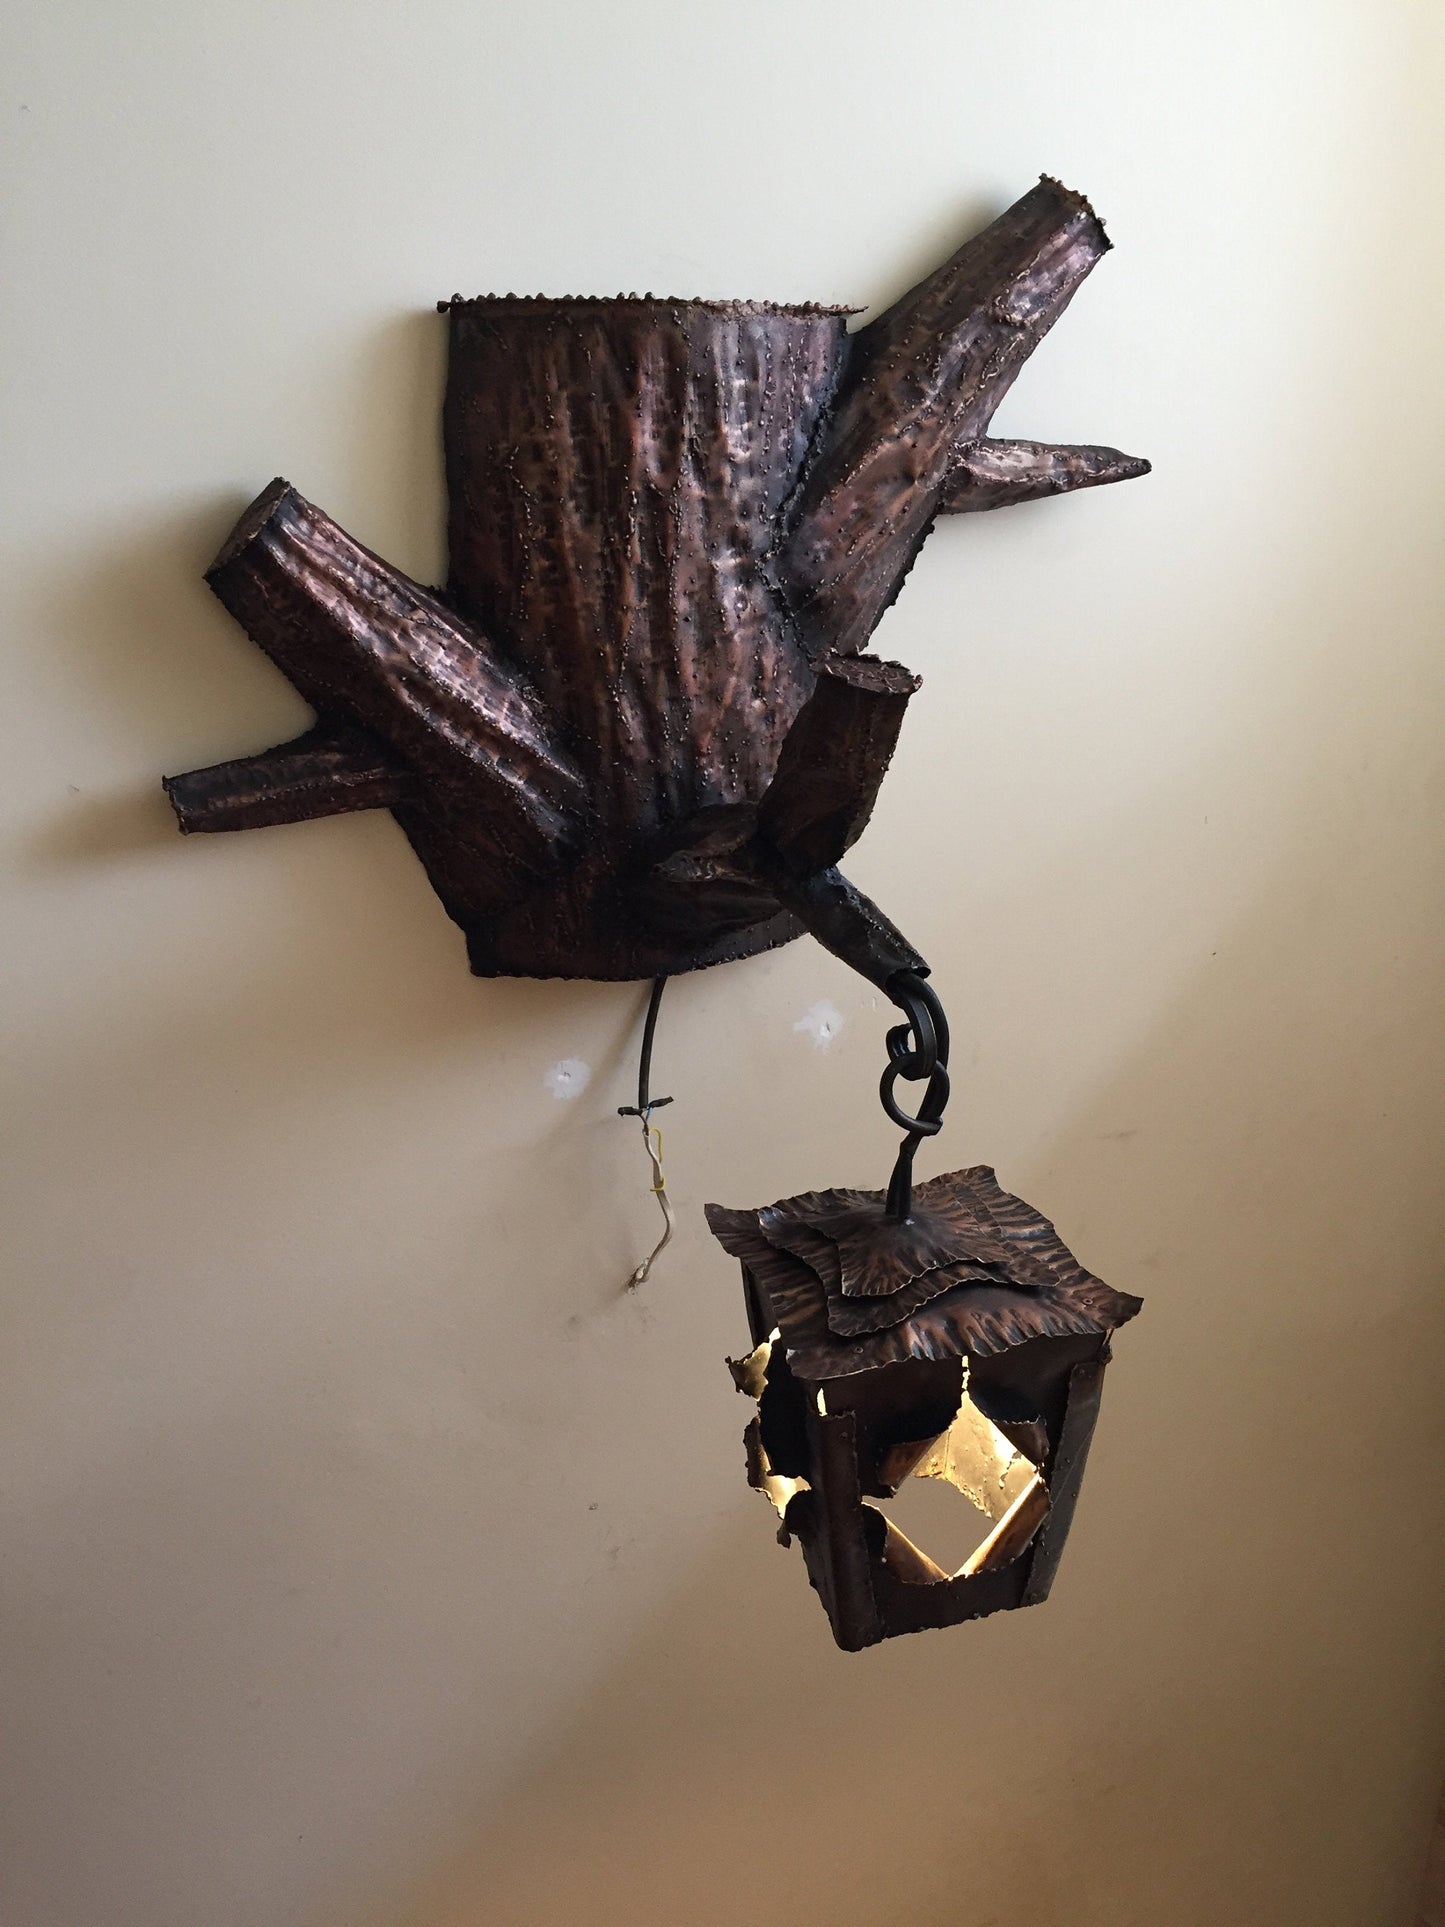 Wall lamp, sconce, sconce light, sconce lighting, sconce light fixture, sconce shades, hand forged lamp, lantern, chandelier, garden lamp